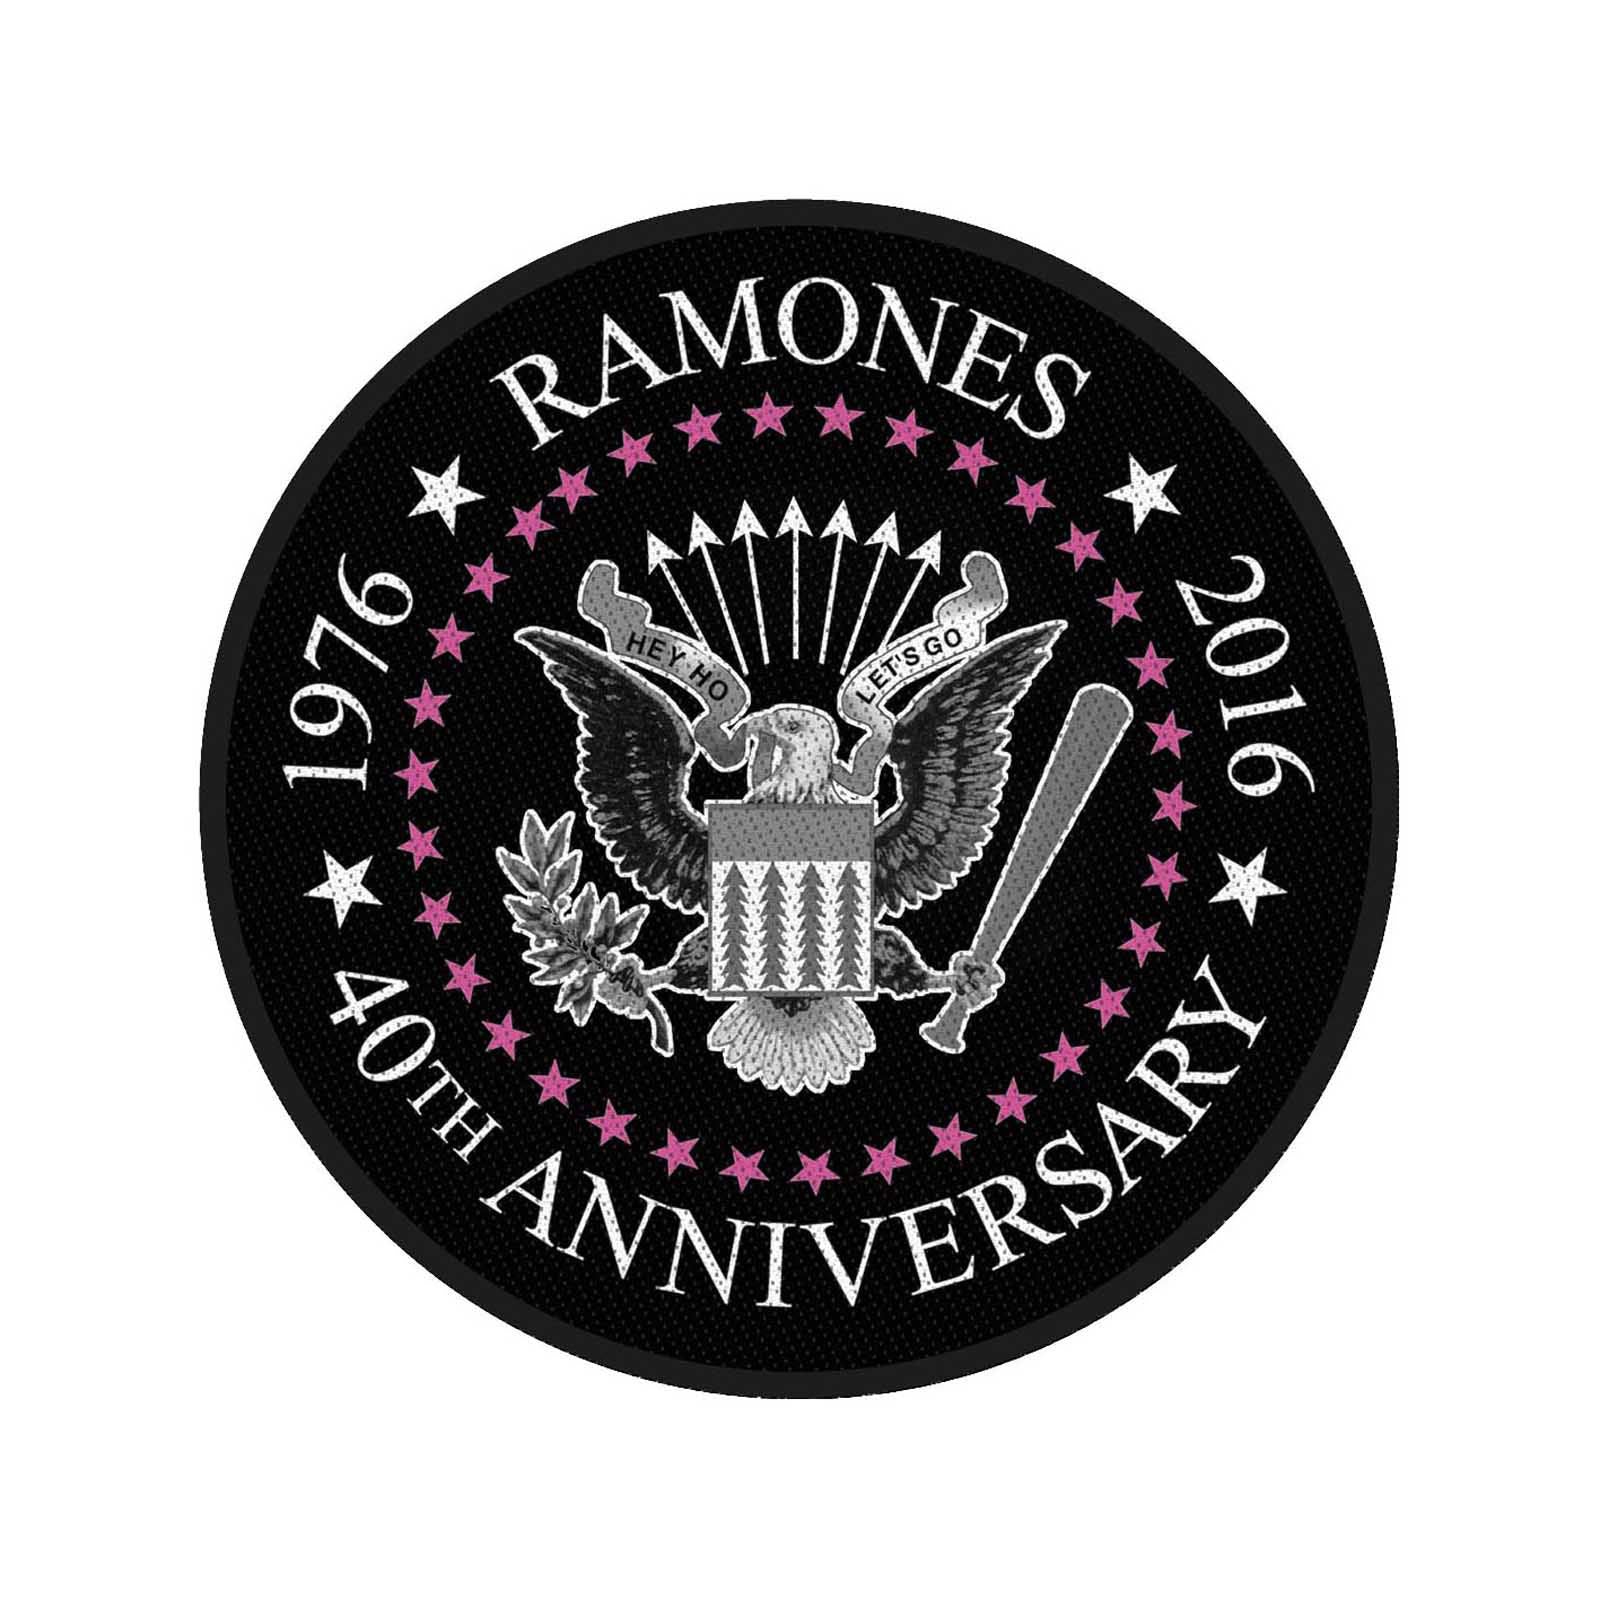 Ramones Standard Patch: 40th Anniversary (Retail Pack)